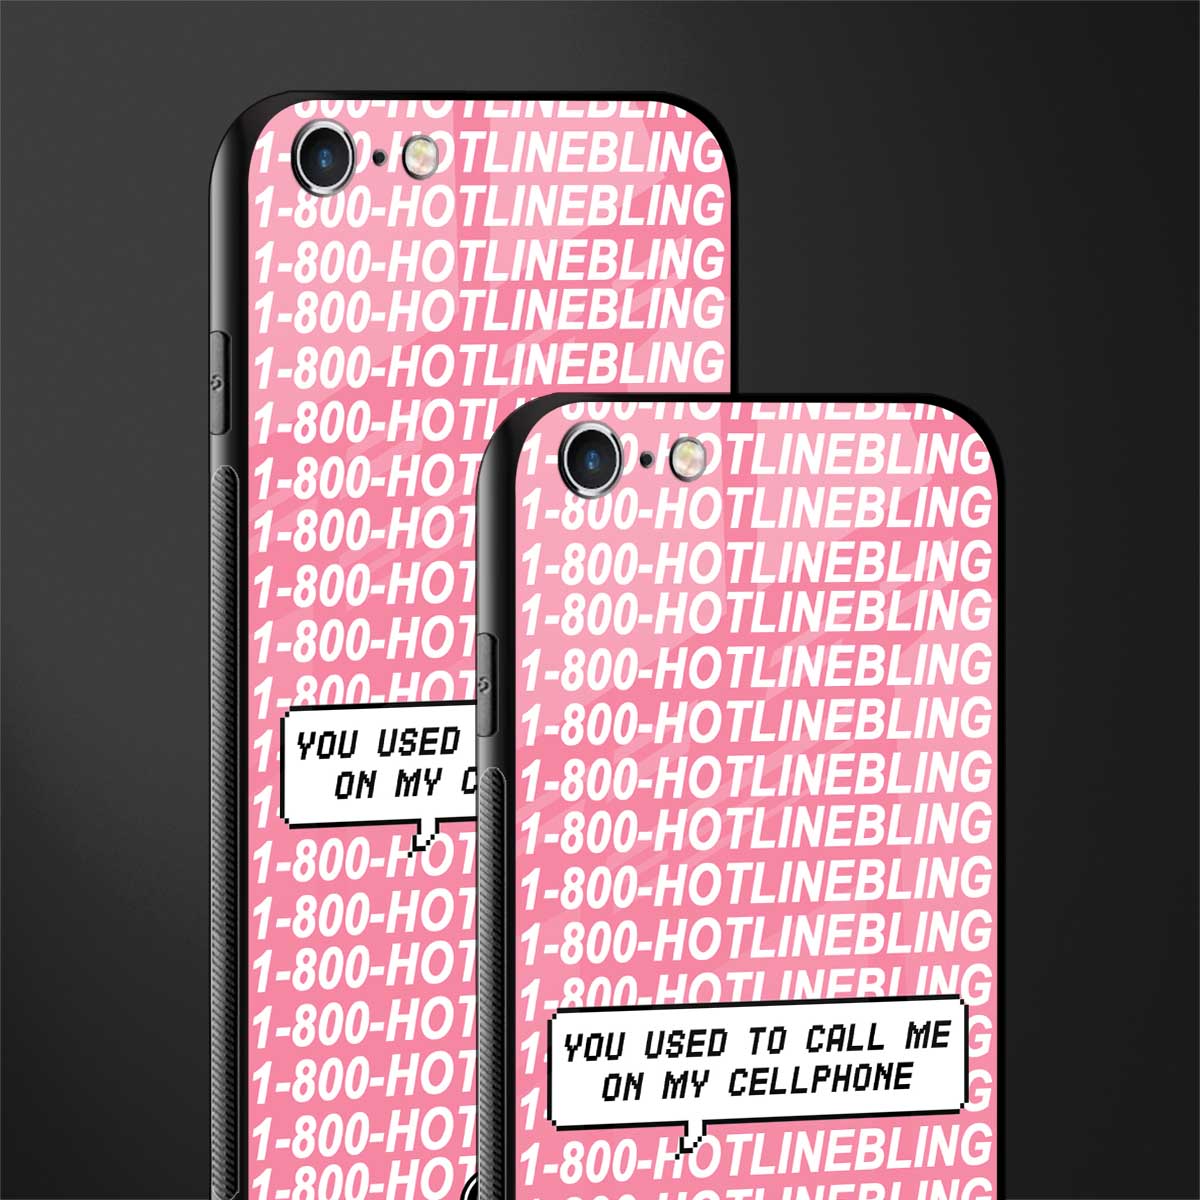 1800 hotline bling phone cover for iphone 6 